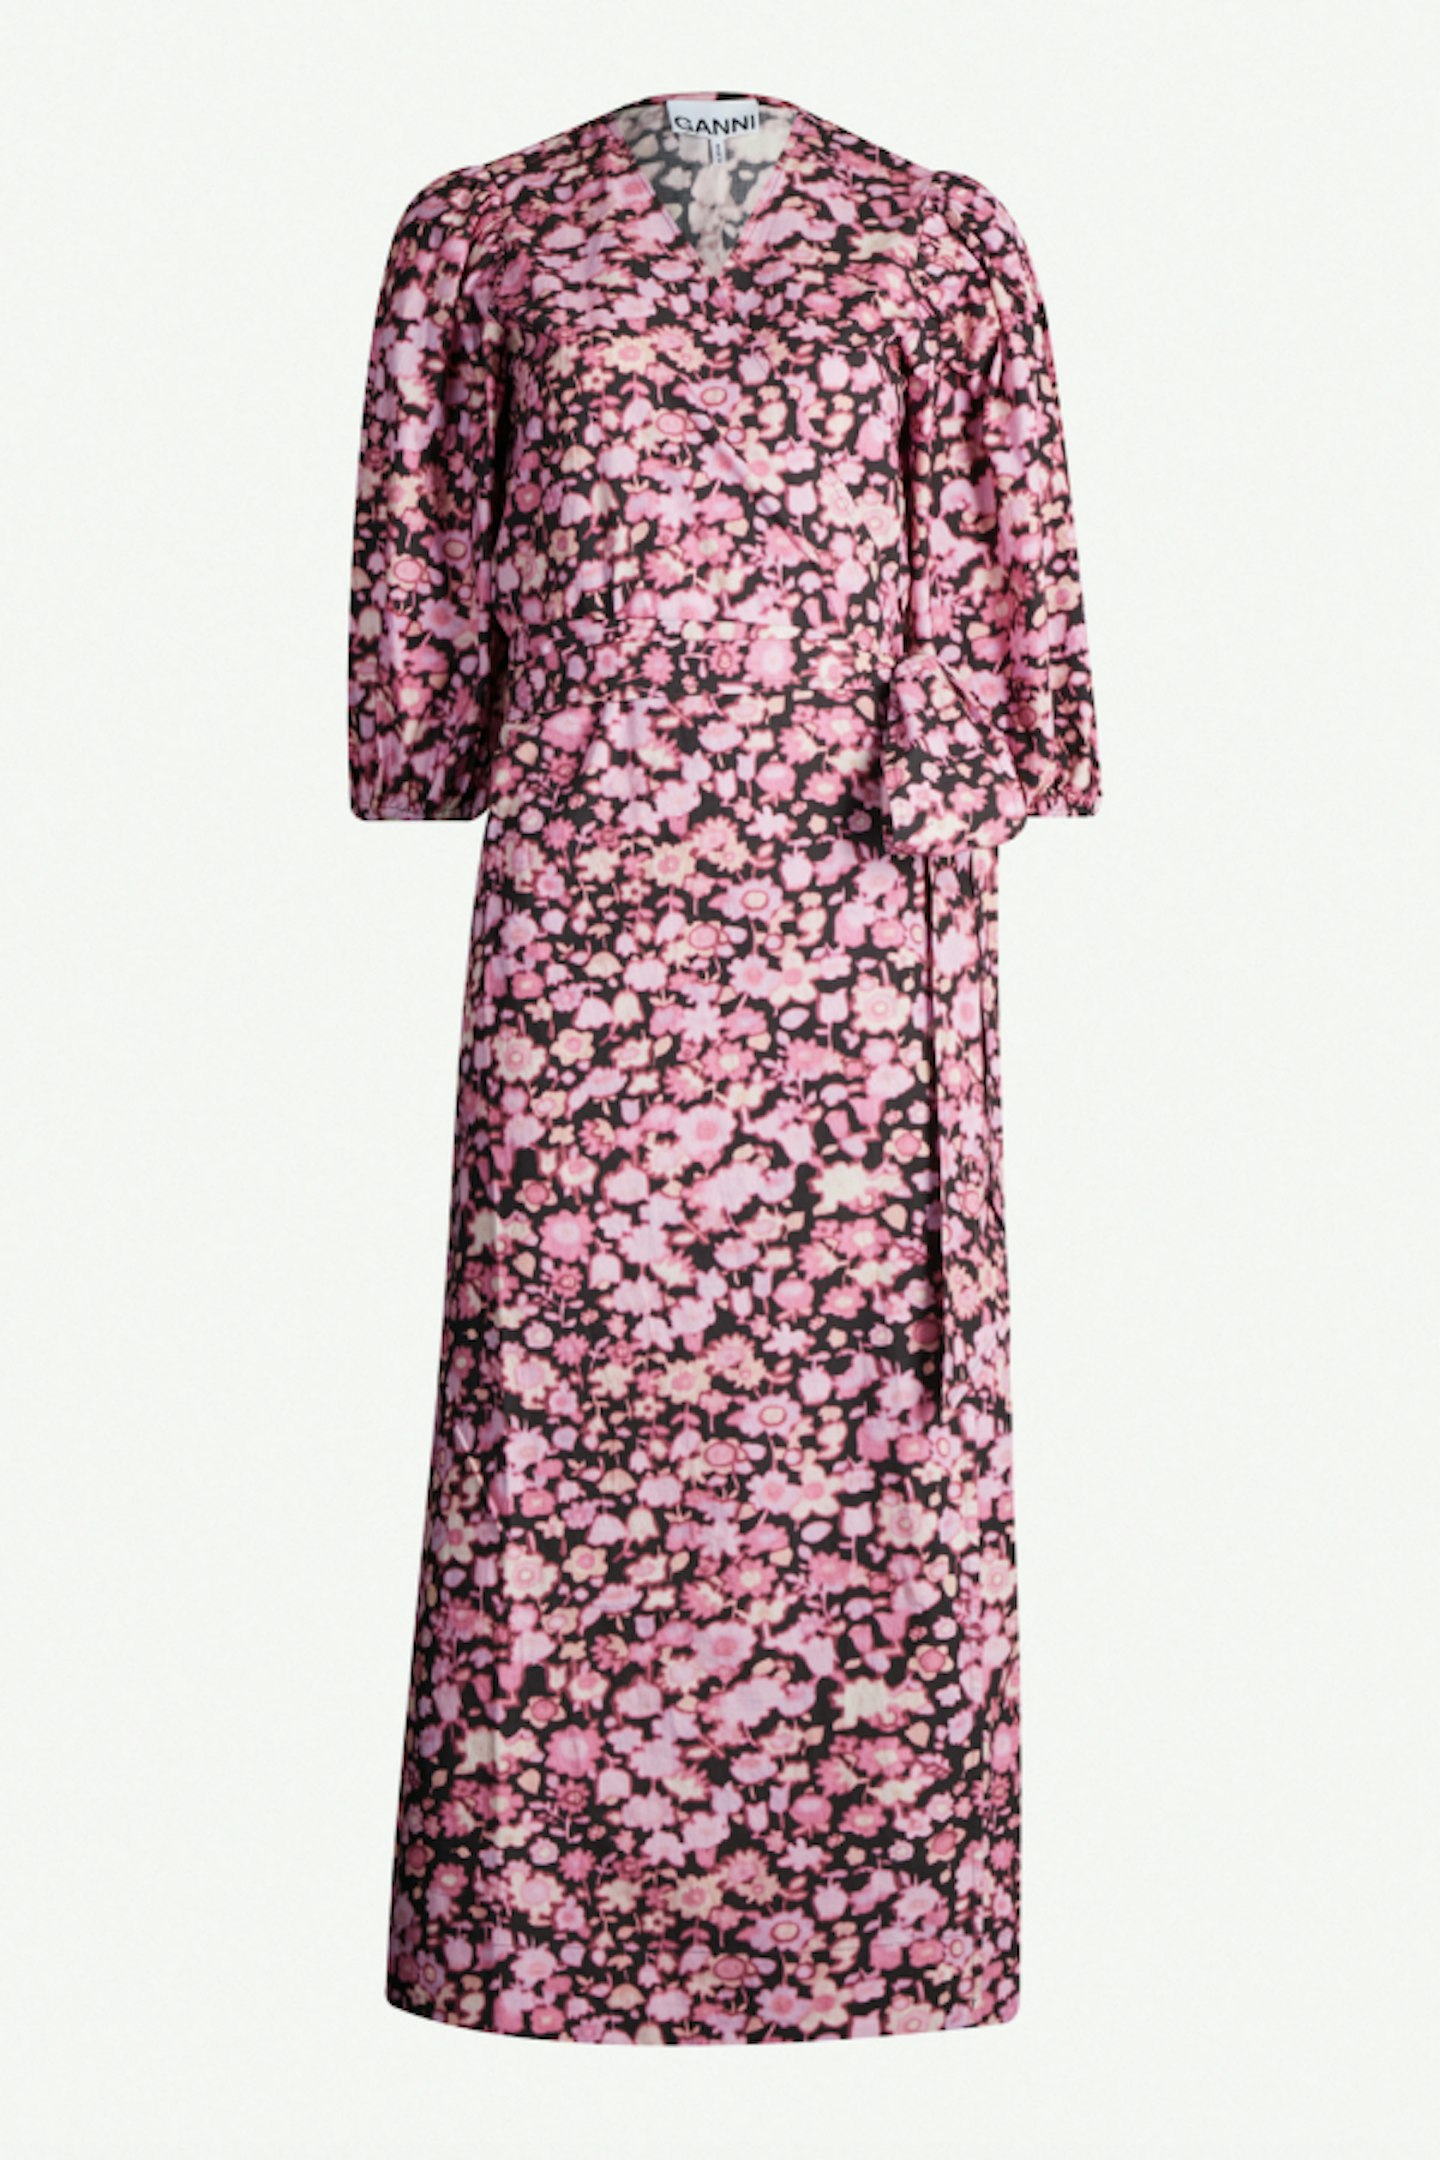 Ganni, Floral Wrap Dress, Rent From £25